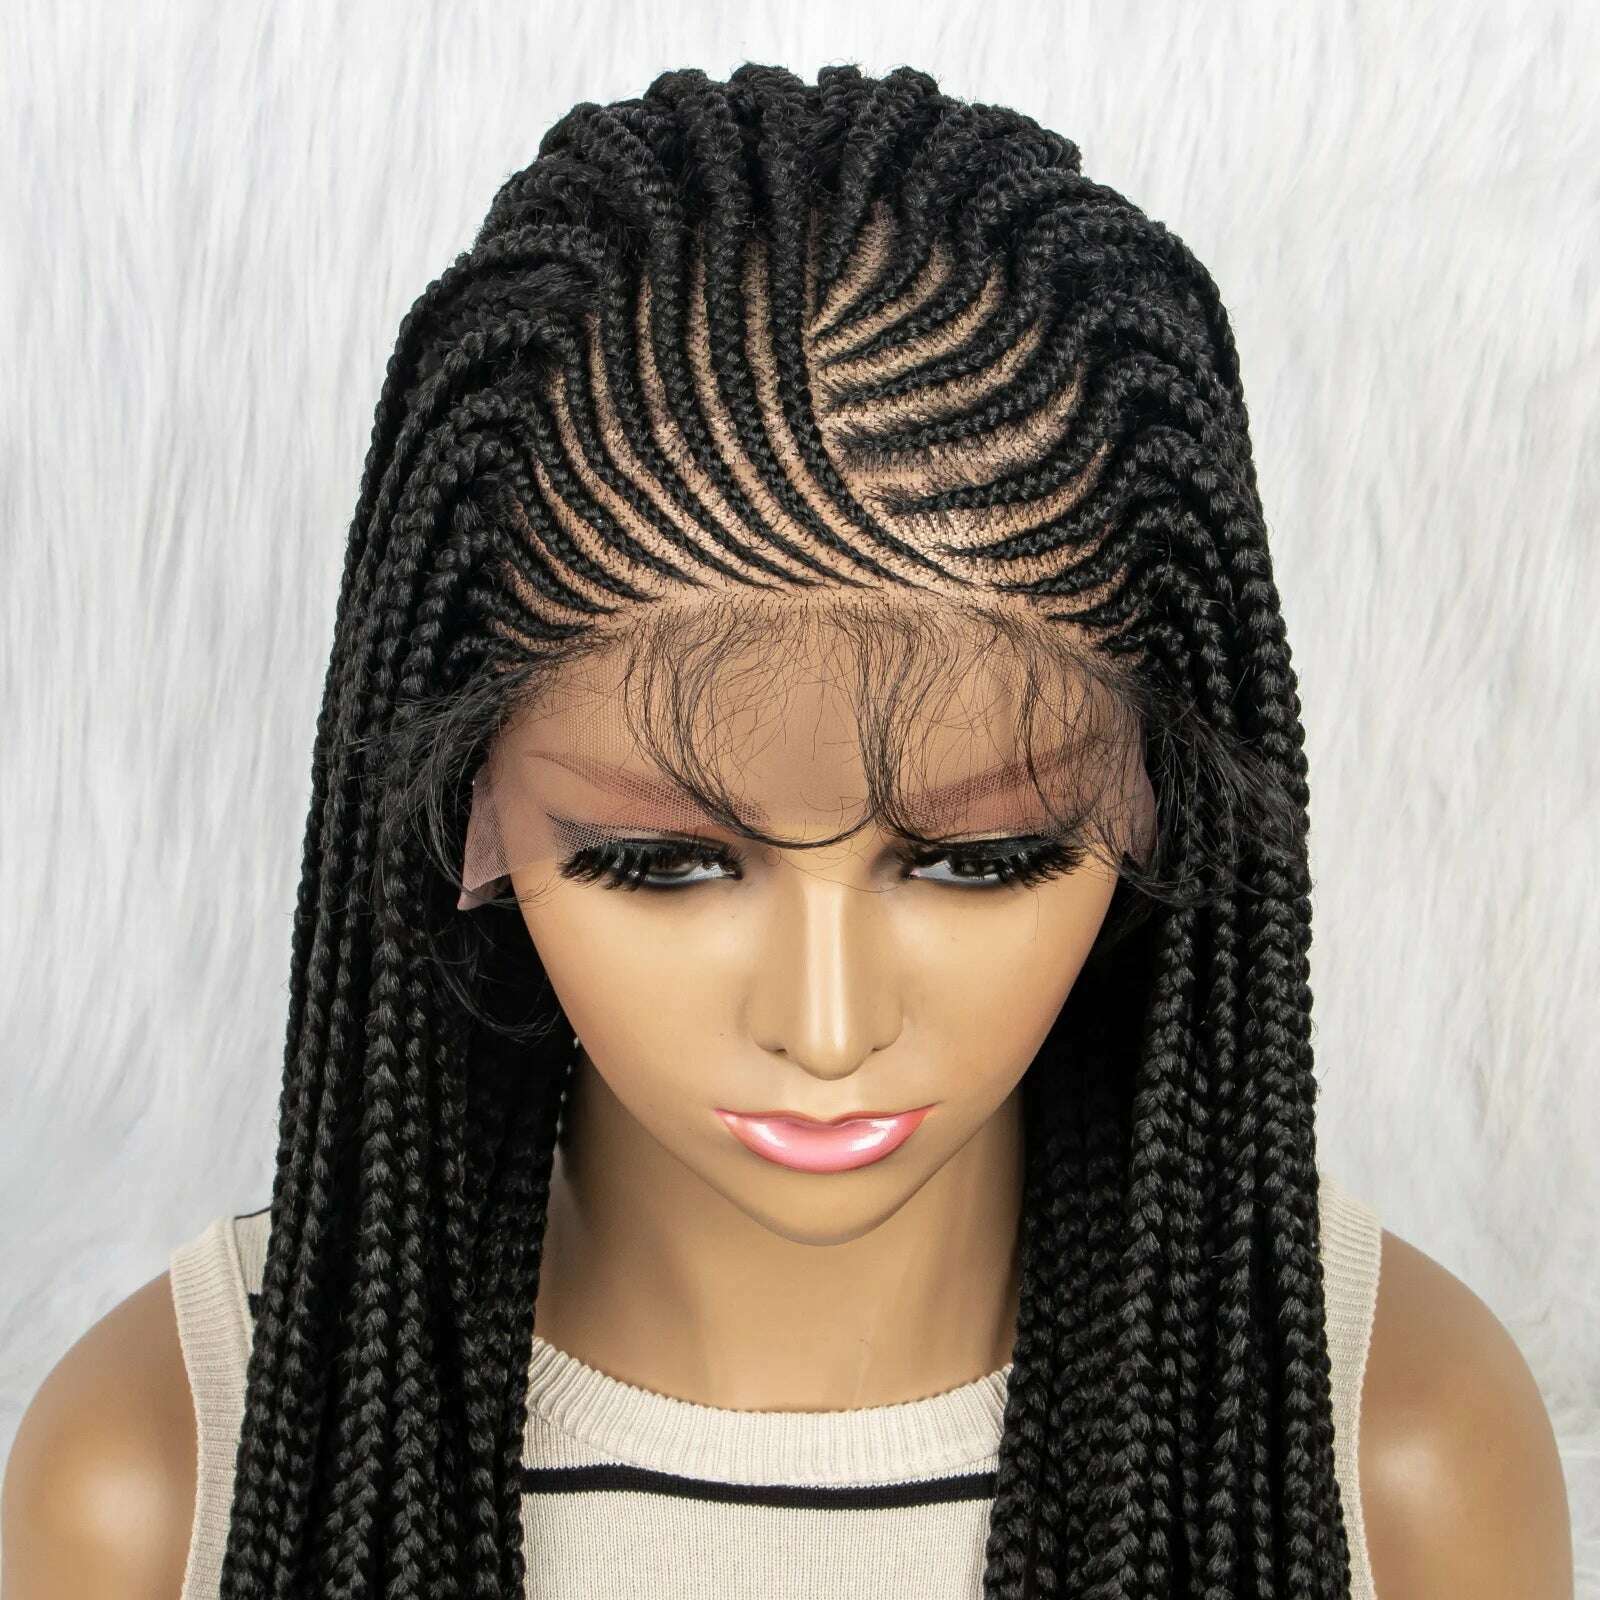 KIMLUD, Synthetic Braided Wigs 13x4 HD Lace Front Braided Wigs for Black Women Synthetic Lace Front Wigs Braided Wigs With Baby Hair, 1B / 28inches, KIMLUD Womens Clothes